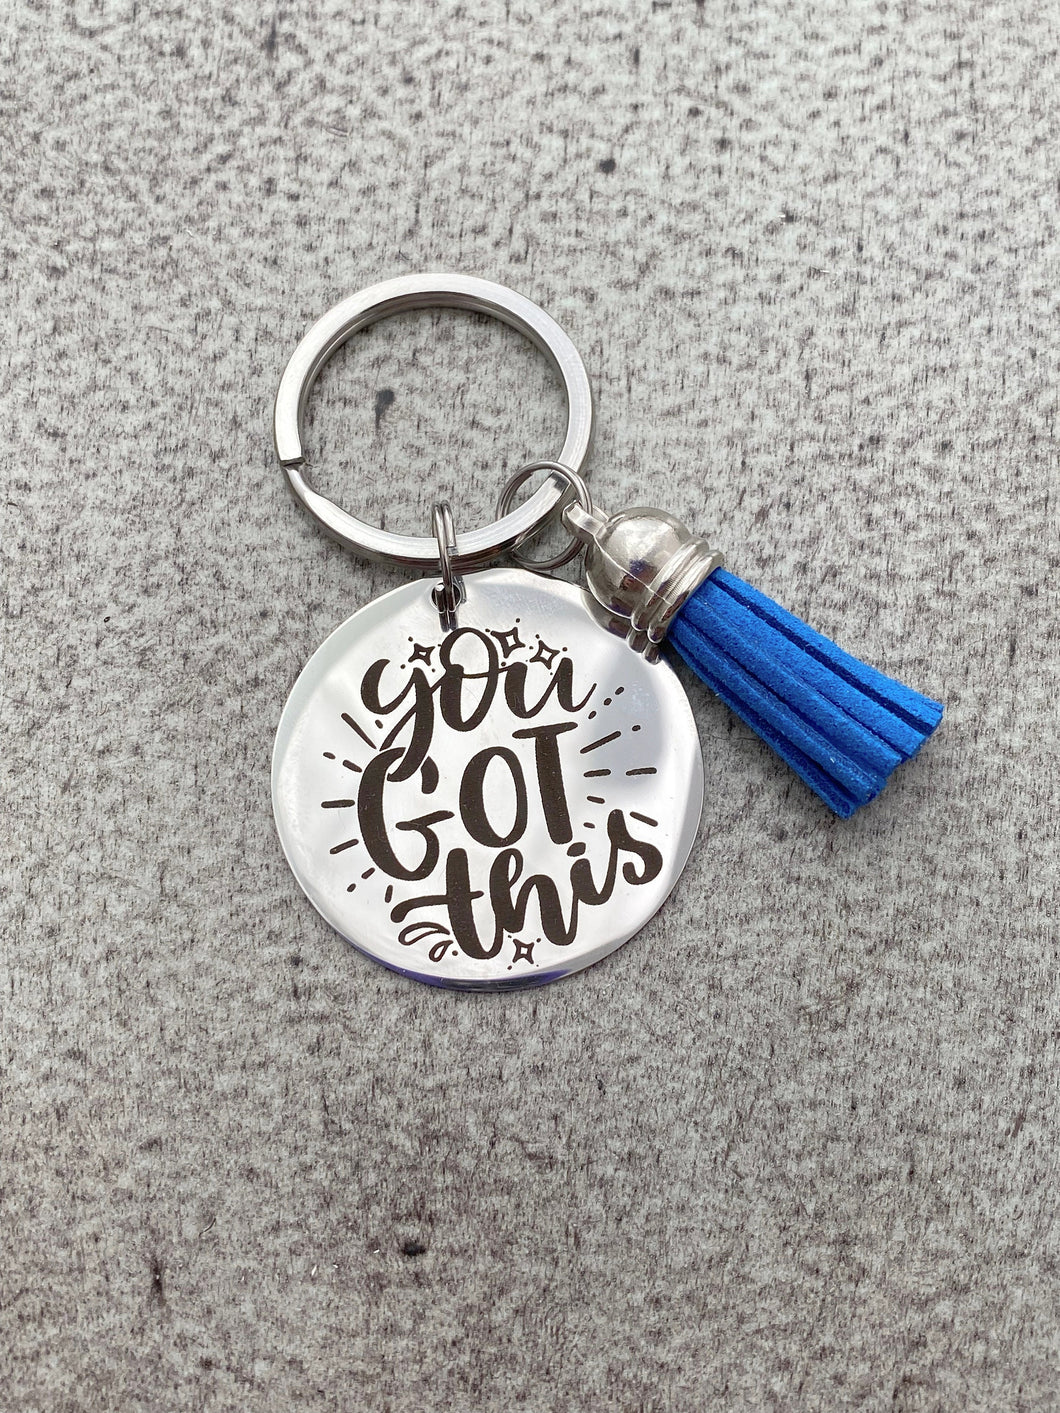 you got this keychain - stainless steel engraved Key Chain -  with tassel charm - gift for friend - motivational gift